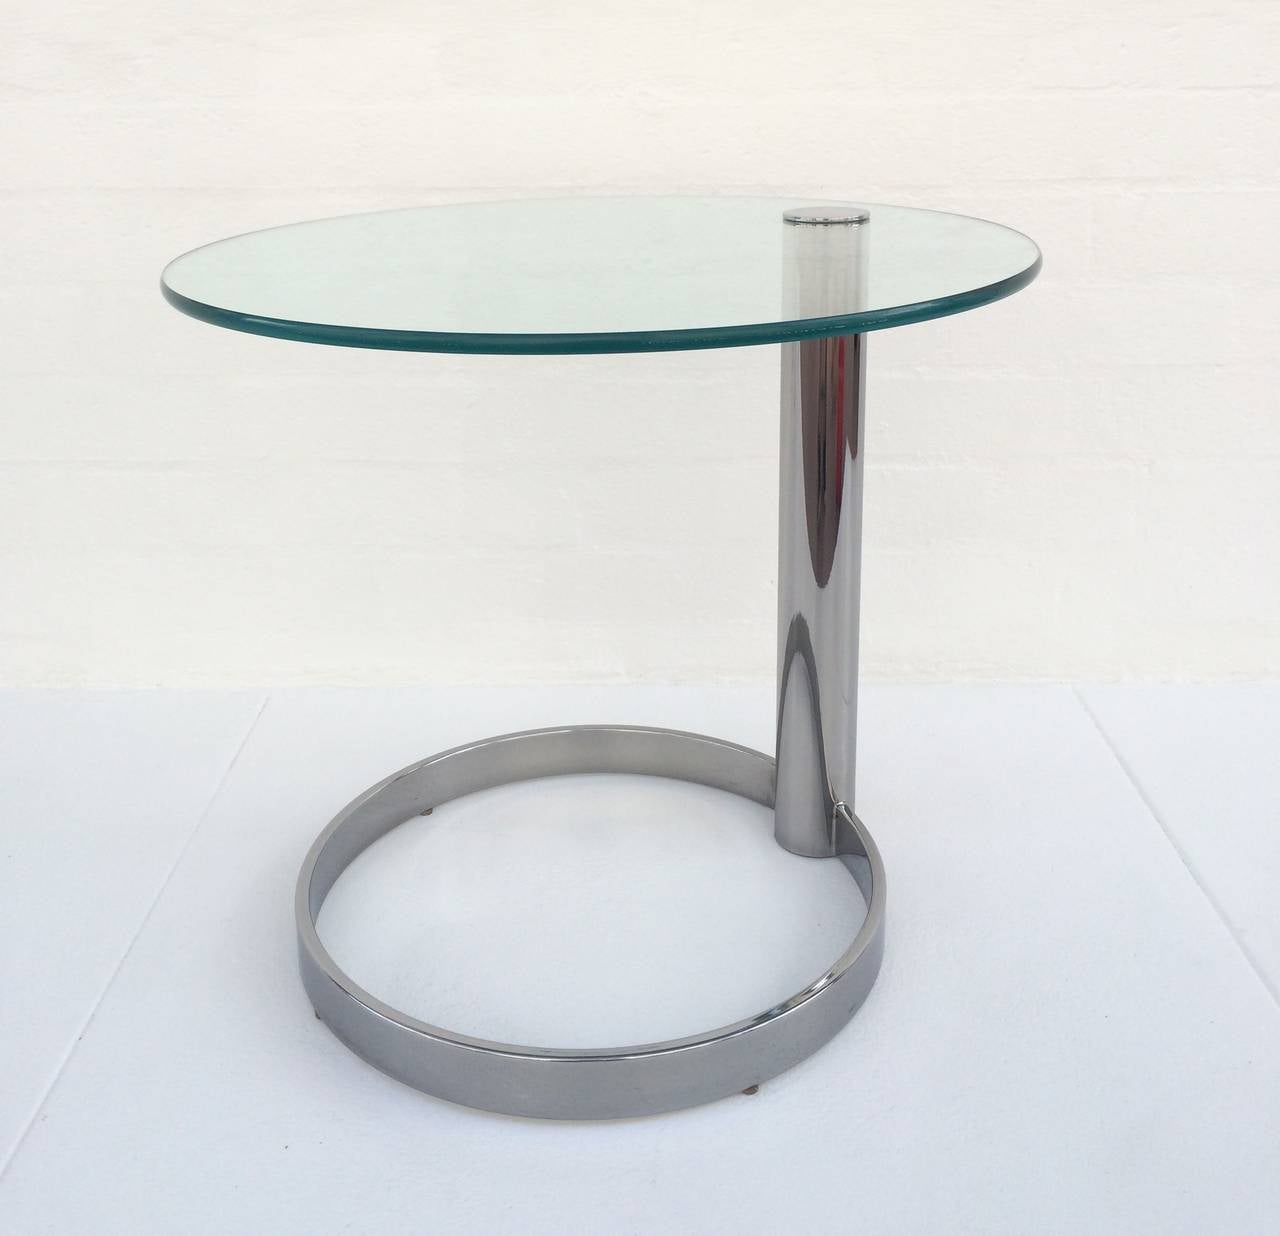 Side table made by Pace Collection, circa 1980s.
This table consists of nickel-plated base with a 1/2 inch thick glass top.
New glass top.